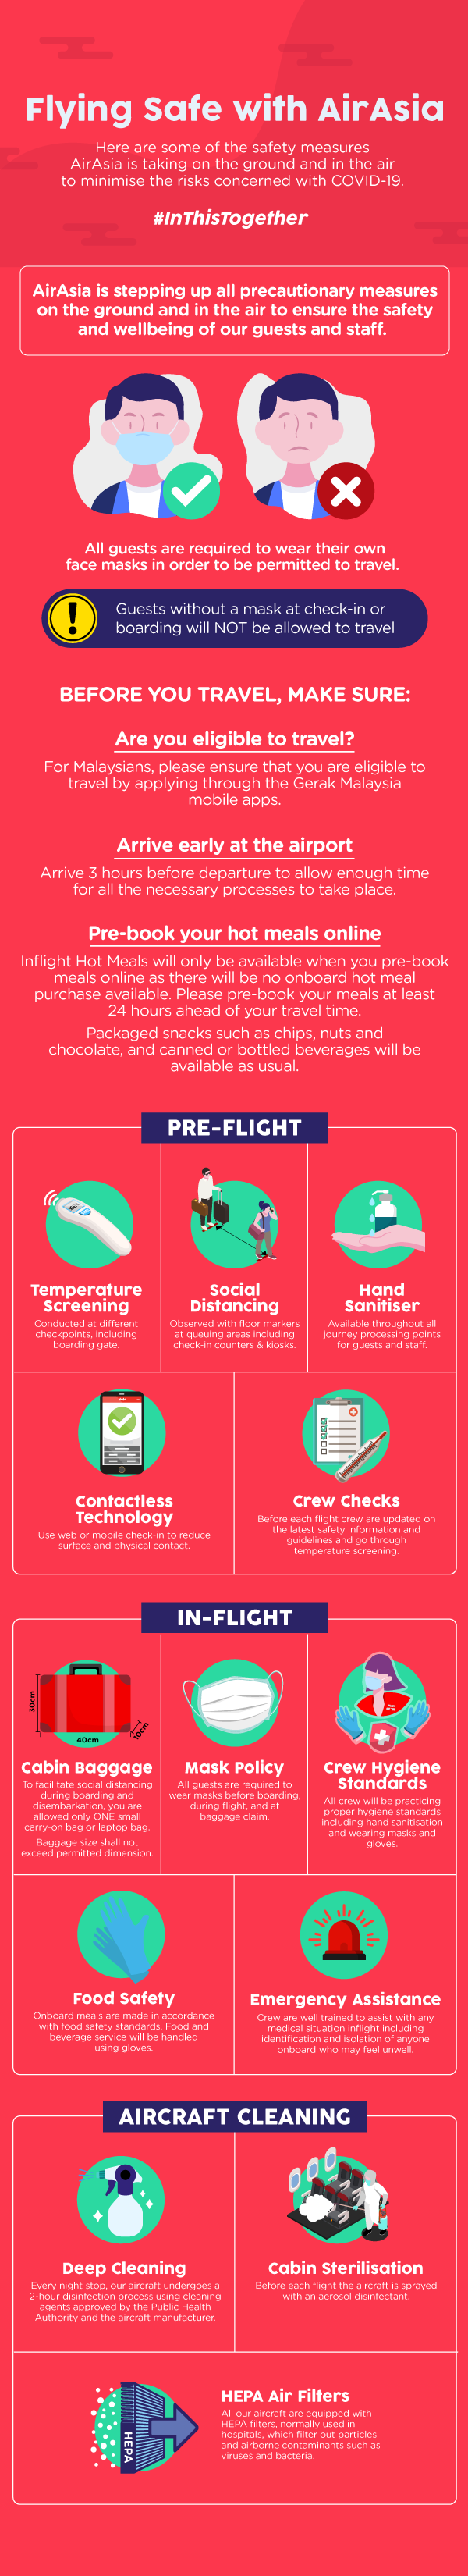 Flying safe with AirAsia